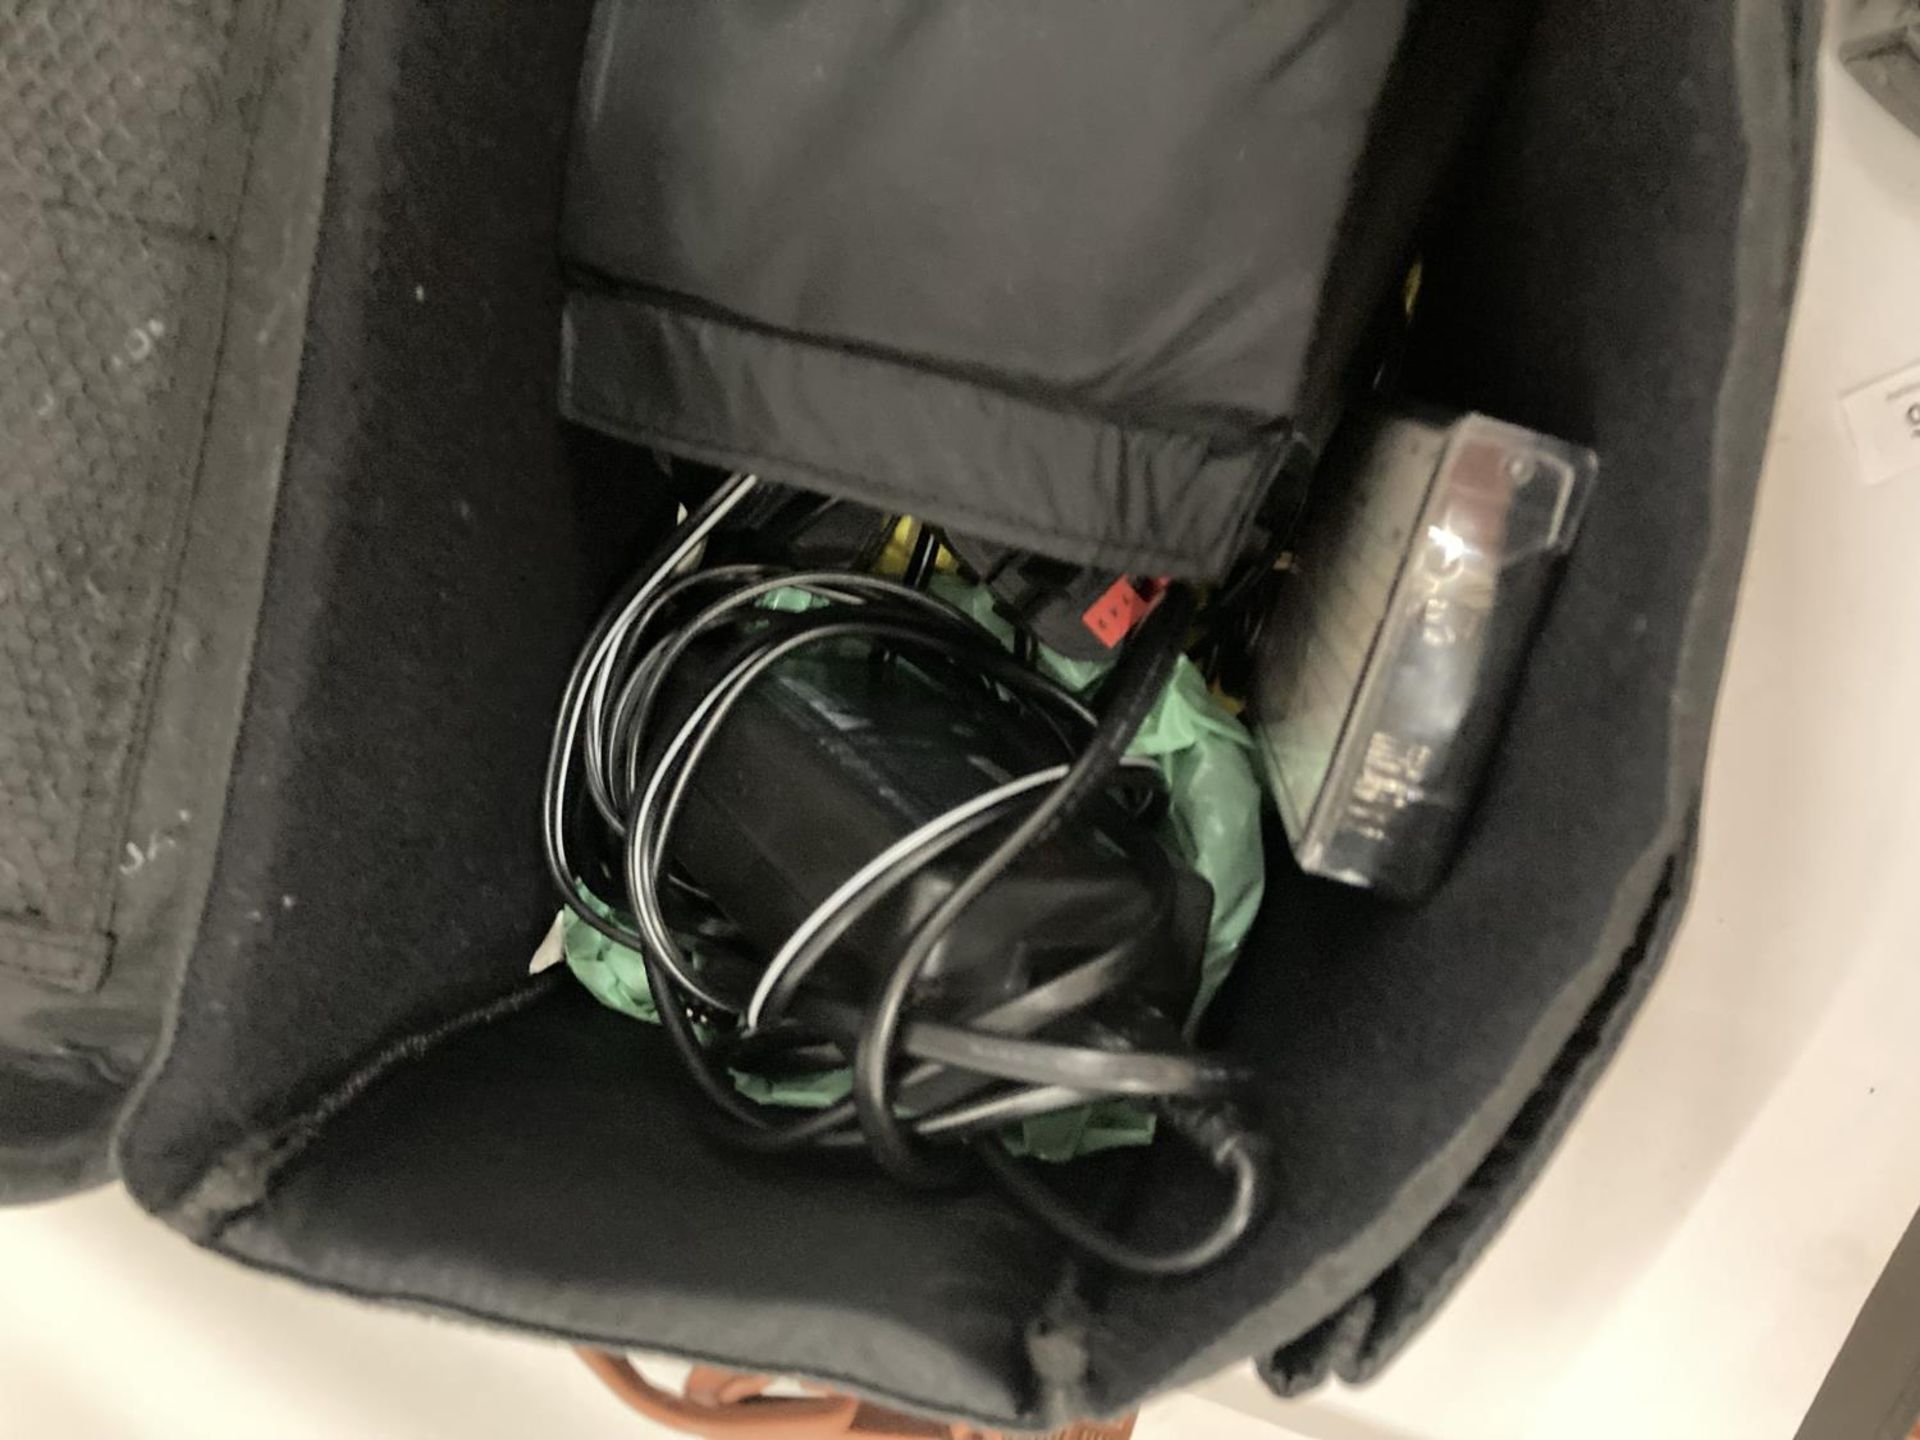 A SONY VIDEO CAMERA RECORDER WITH ACCESSORIES IN A VANGUARD BAG - Image 10 of 10